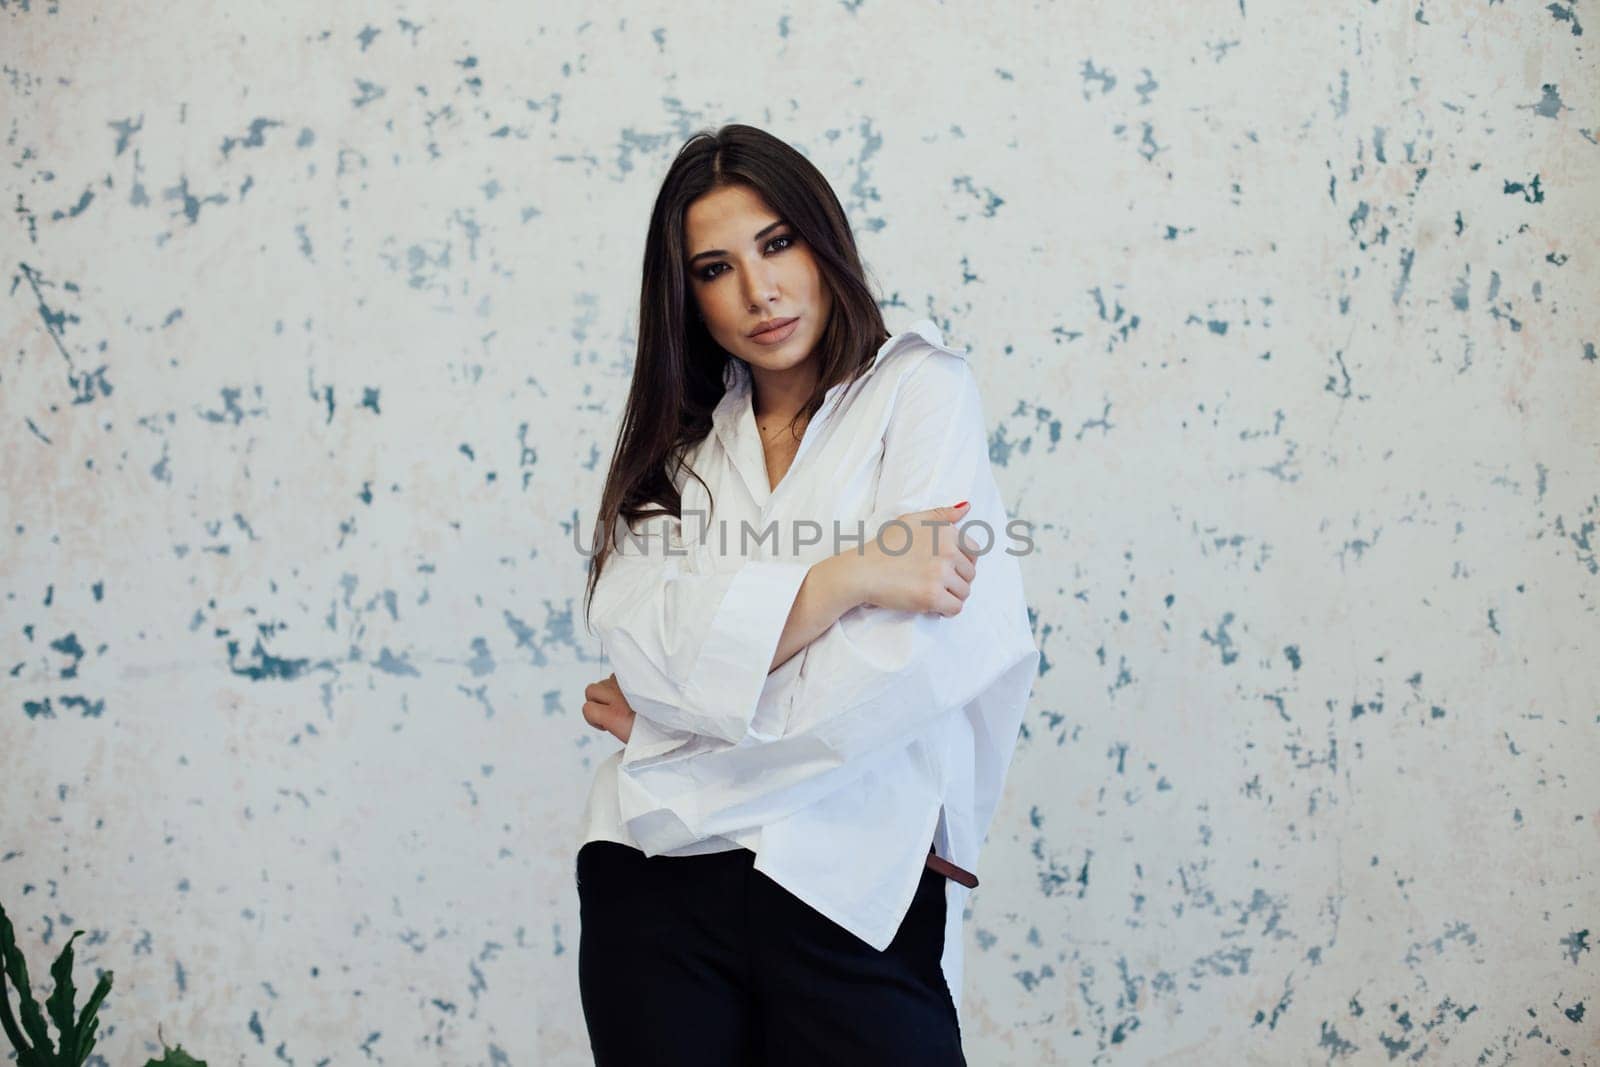 brunette woman in a white shirt posing against a textured wall